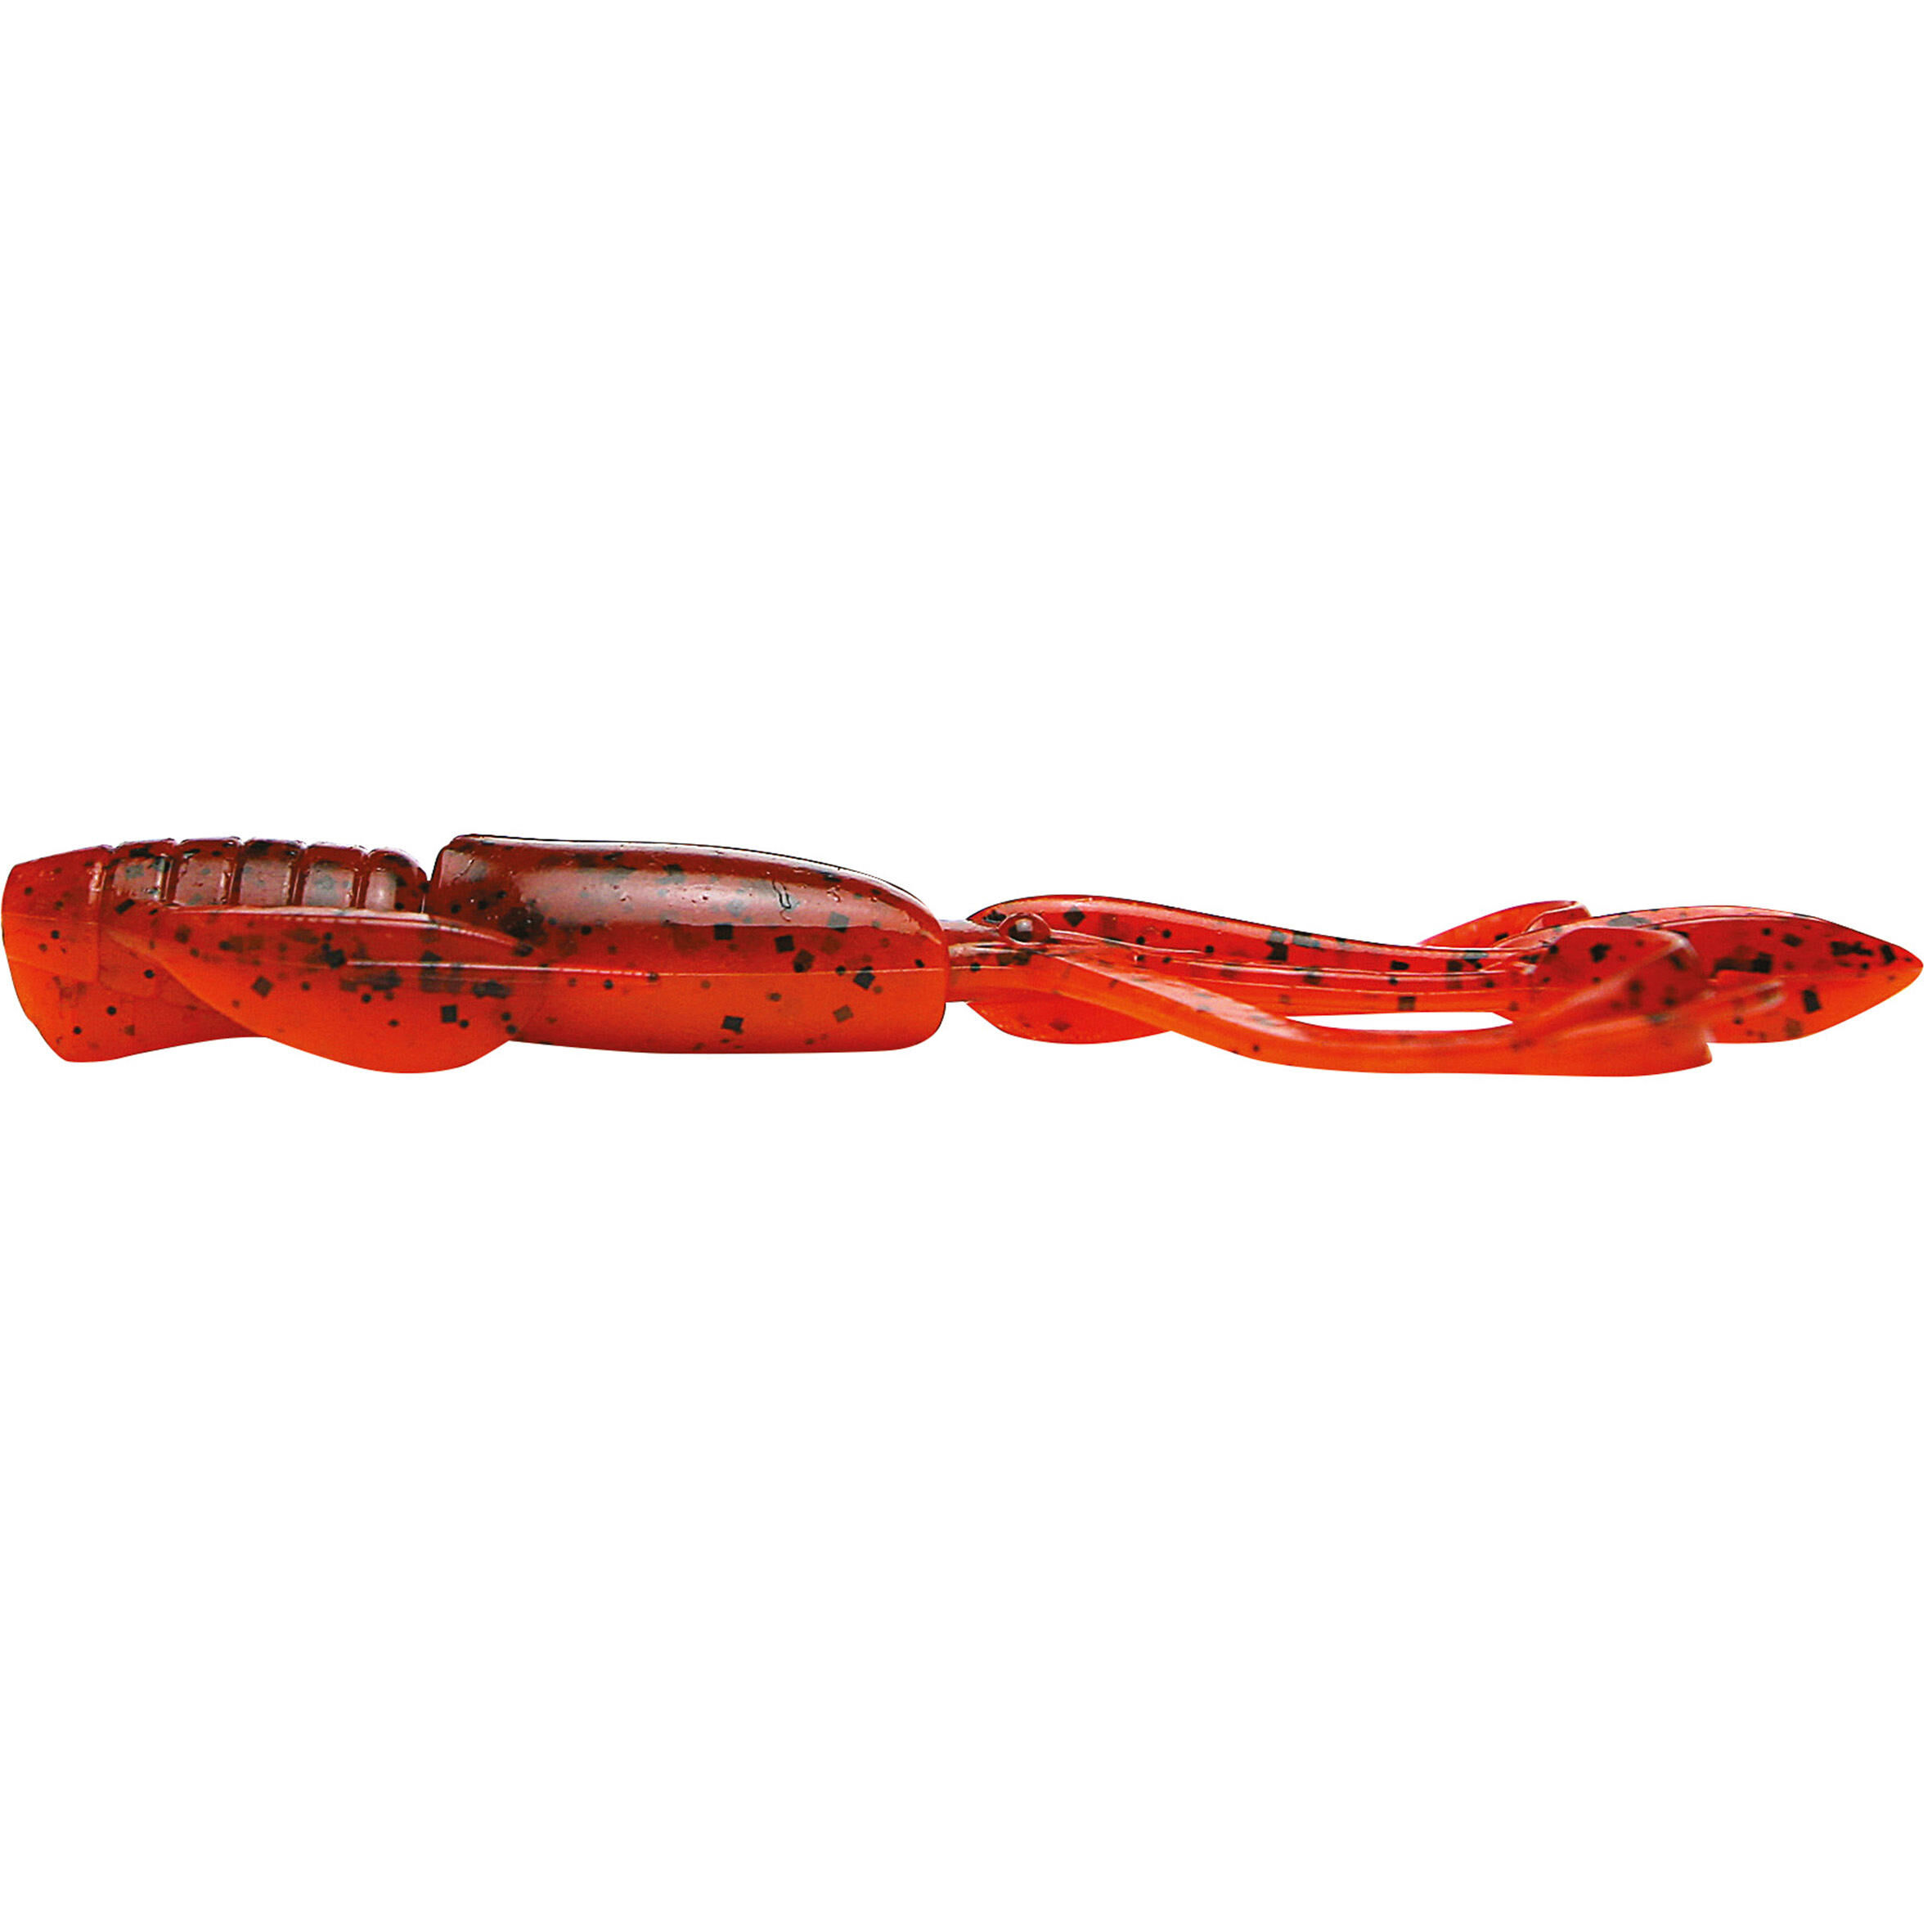 KEITECH LURE FISHING SUPPLE LURE CRAZY FLAPPER 2.8 DELTA CRAW